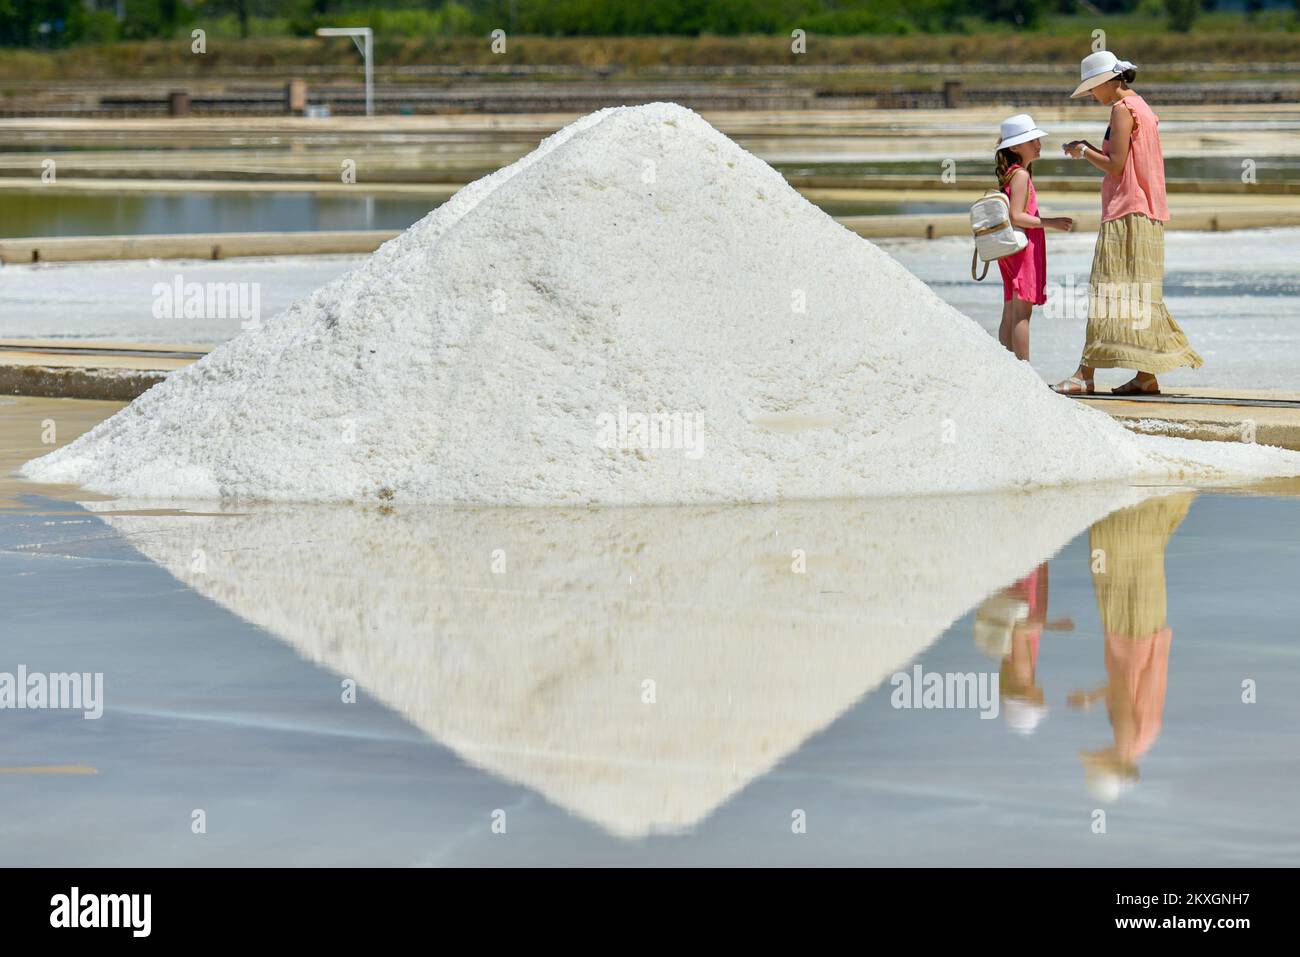 People visit Nin Saltworks in Nin, Croatia, on July 9, 2020. The Saltworks  in Nin, located in the Zadar region, where all of the town's saltwork is  still done traditionally and by